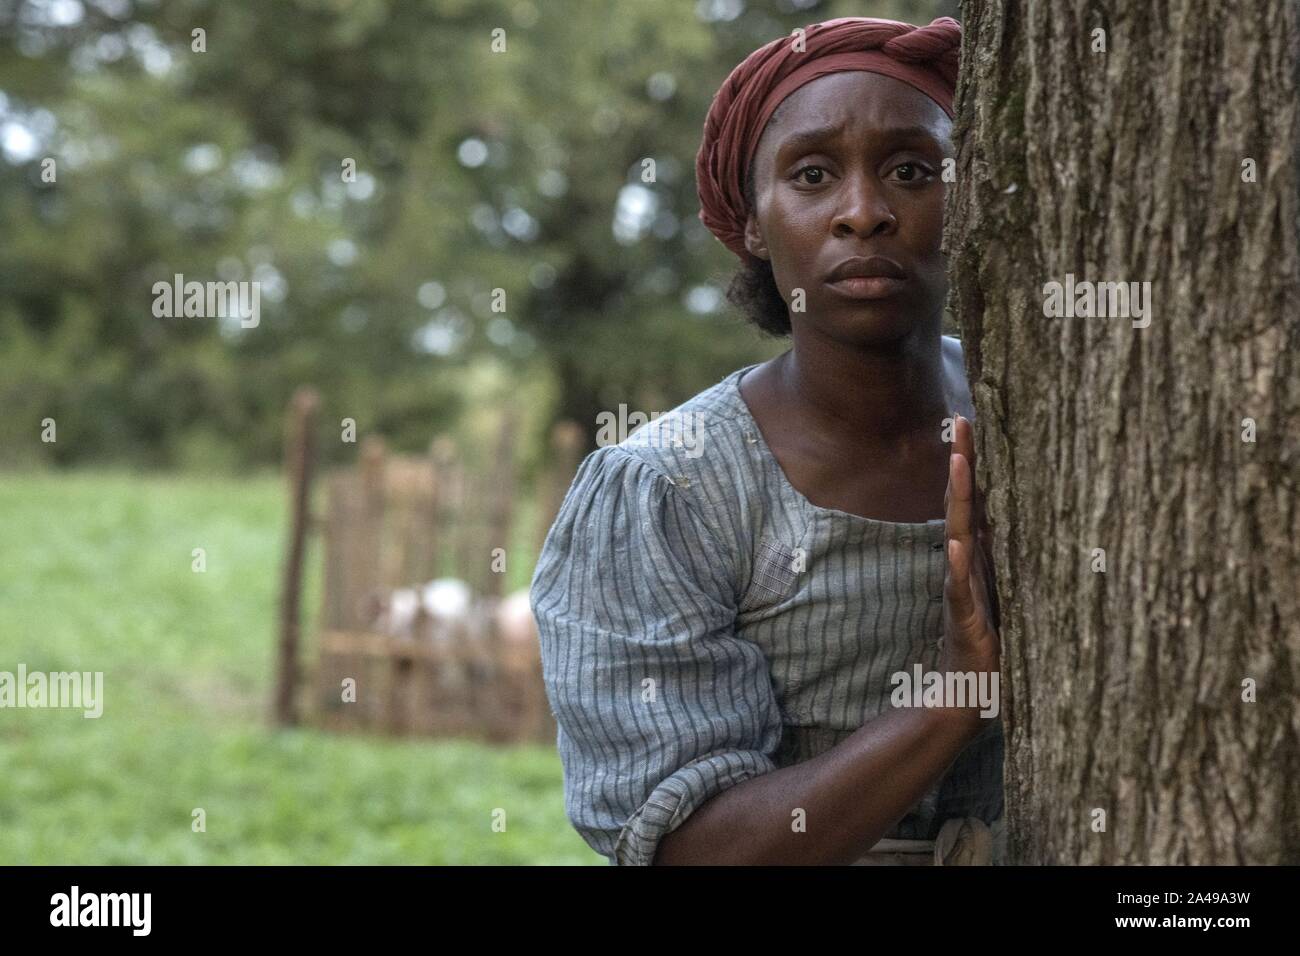 CYNTHIA ERIVO in HARRIET (2019), directed by KASI LEMMONS. Credit: FOCUS FEATURES / Album Stock Photo